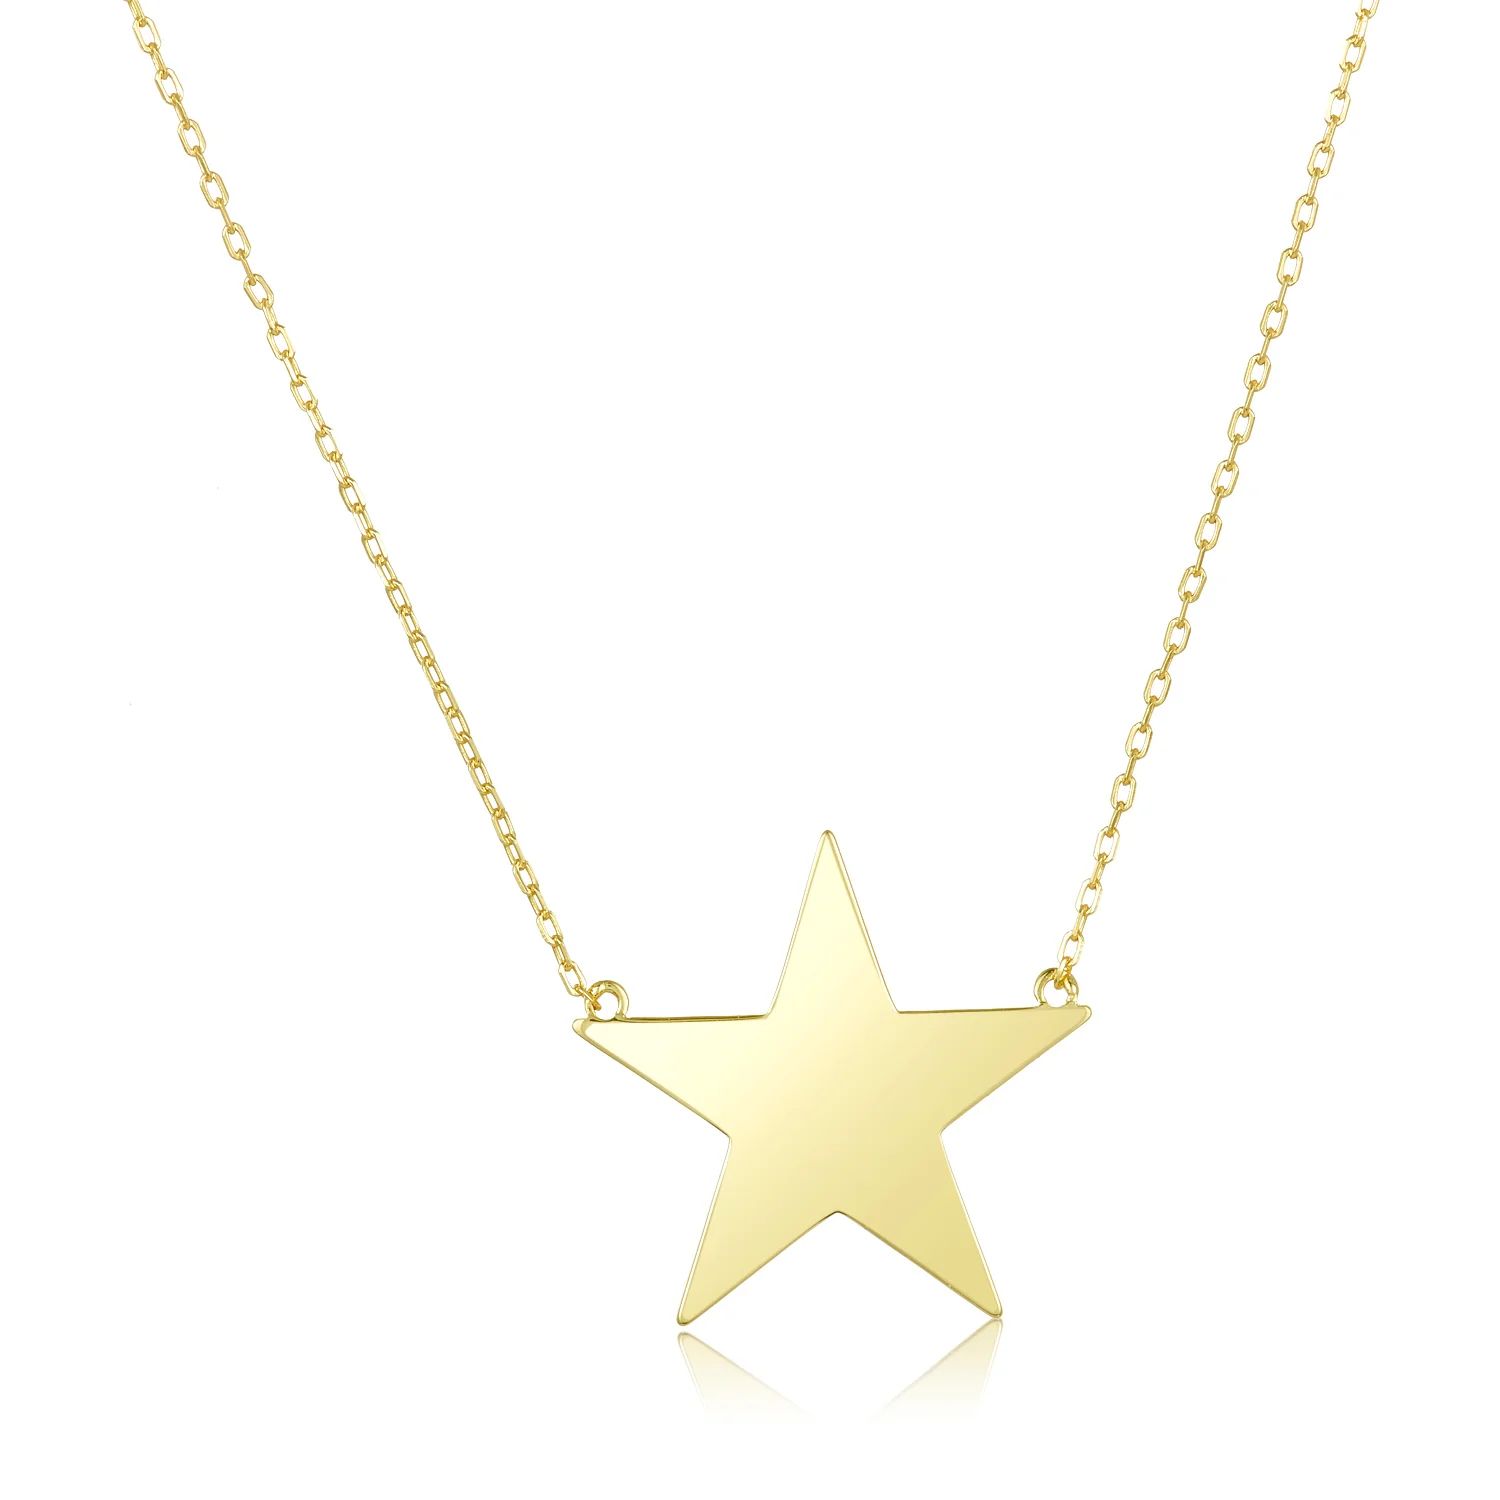 "You Are My Big Star" Necklace | Melinda Maria